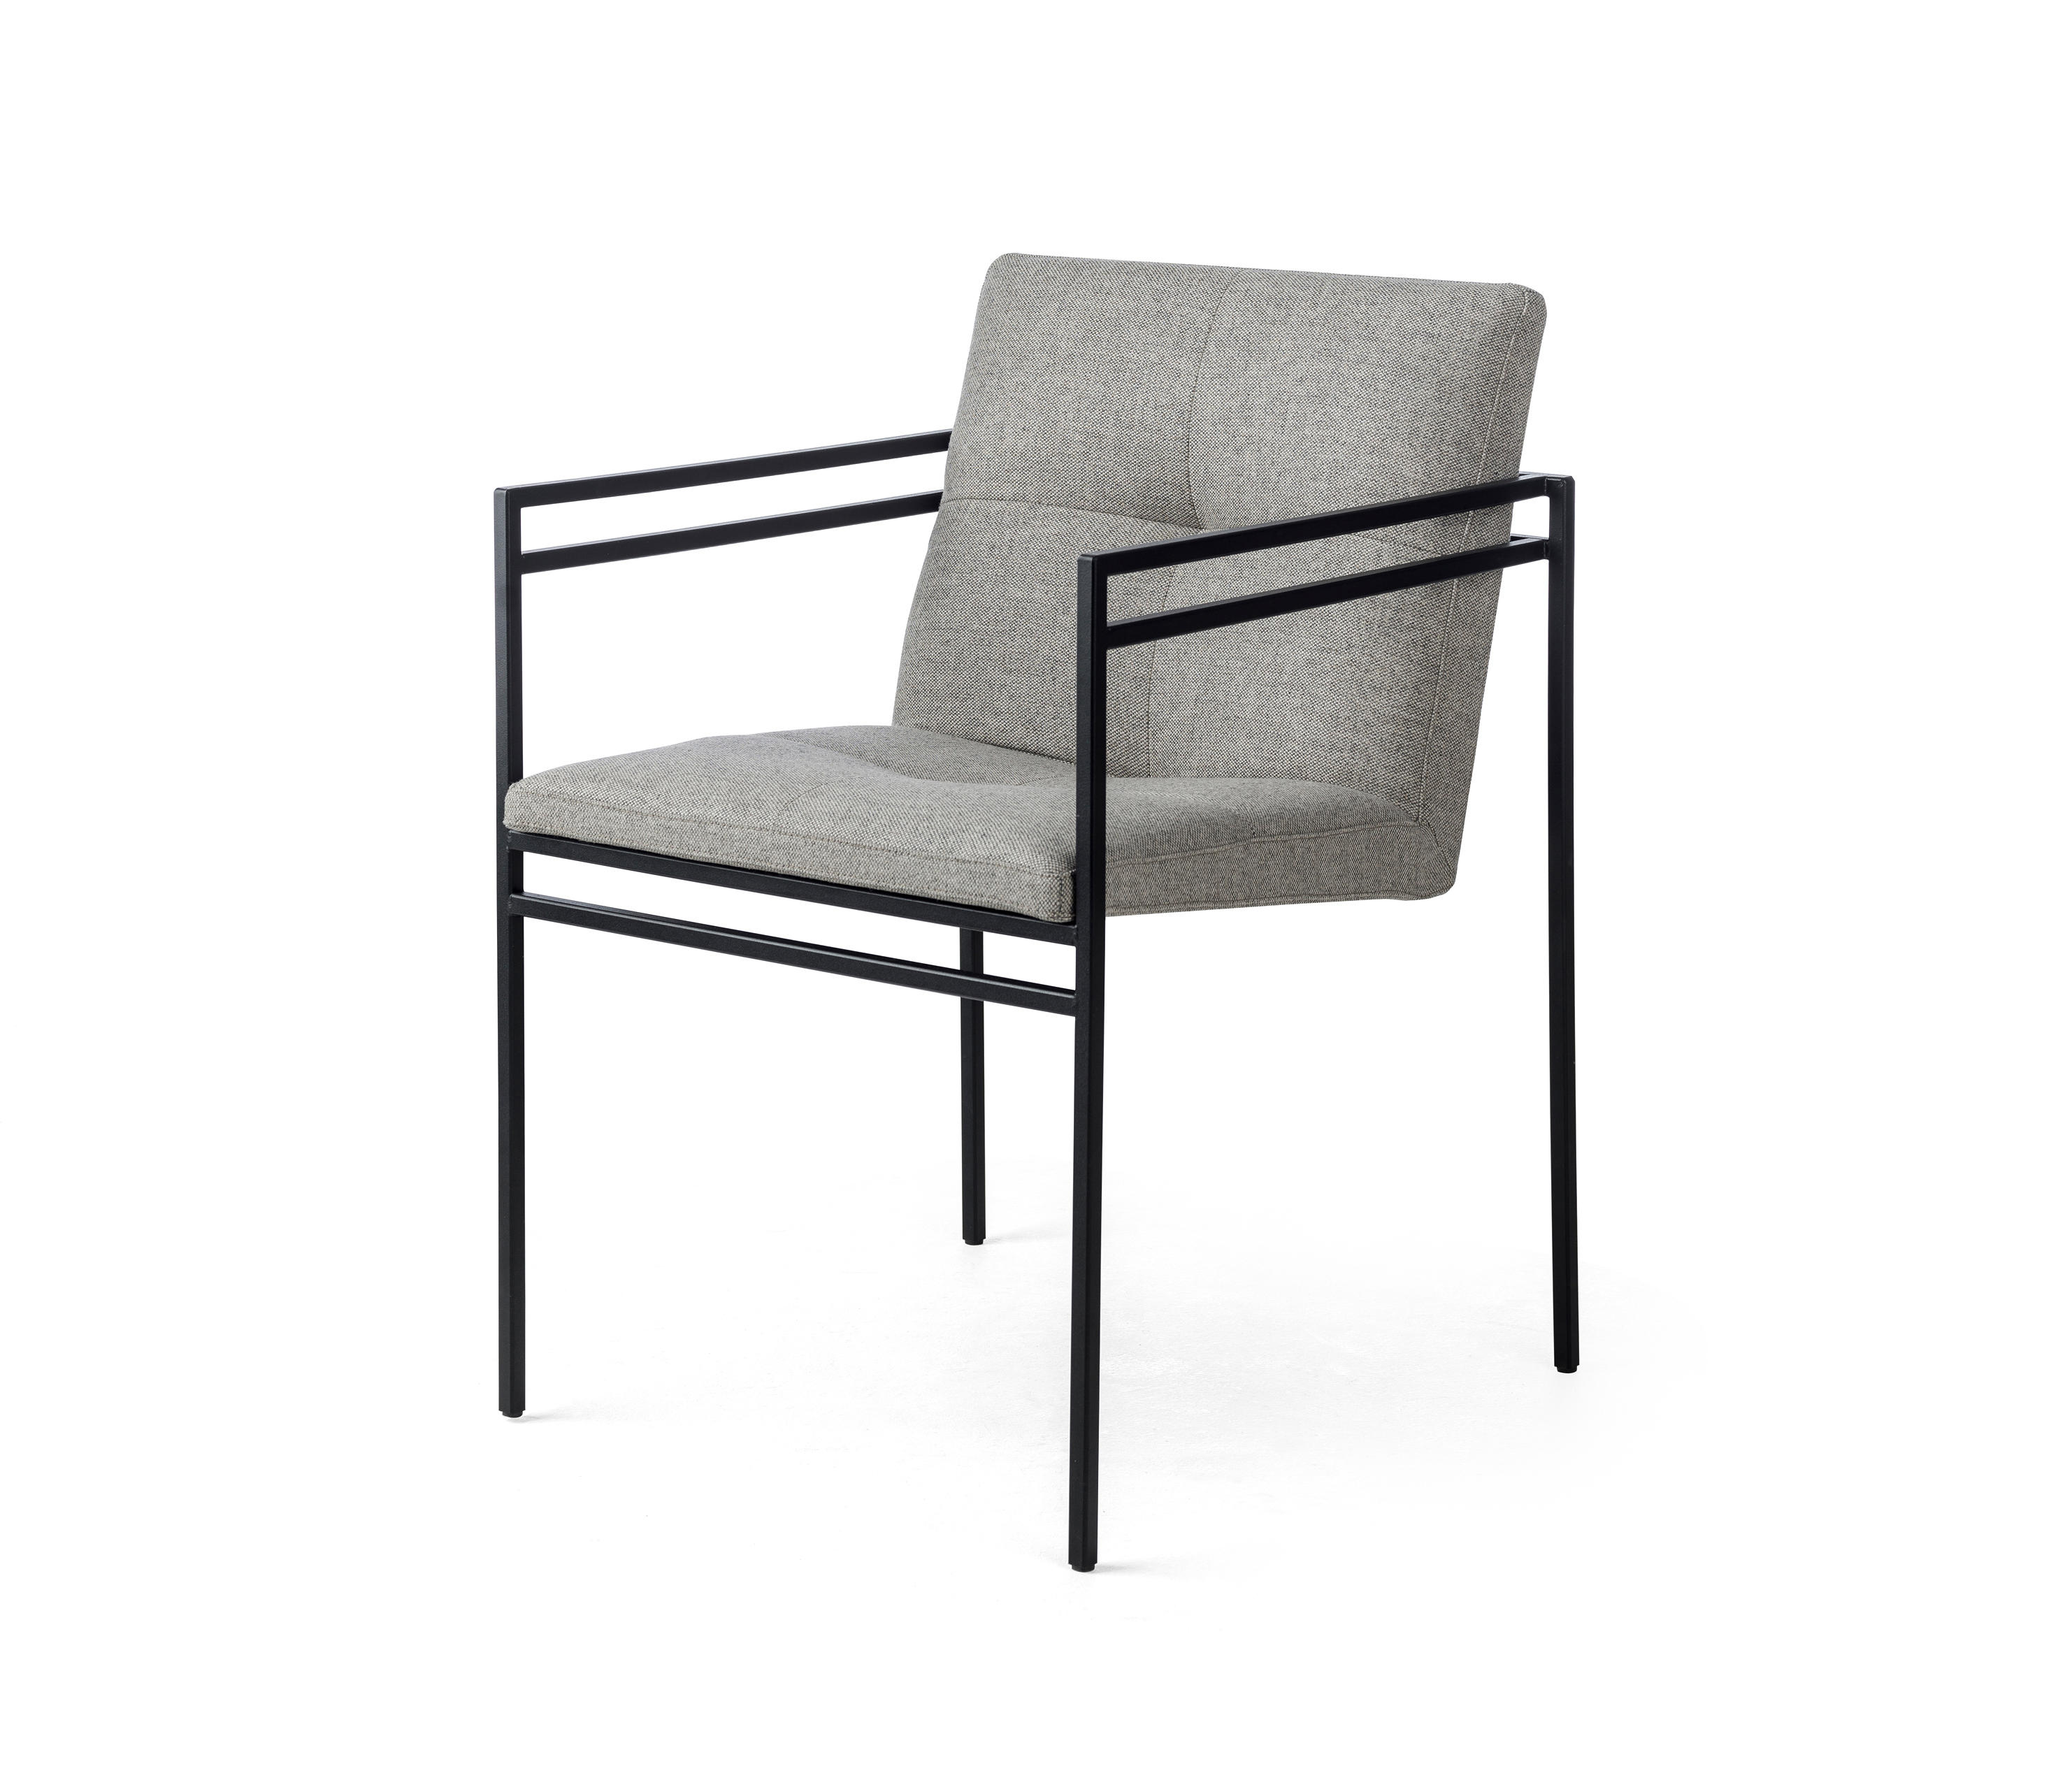 MOMENT-08 - Chairs from Johanson Design | Architonic